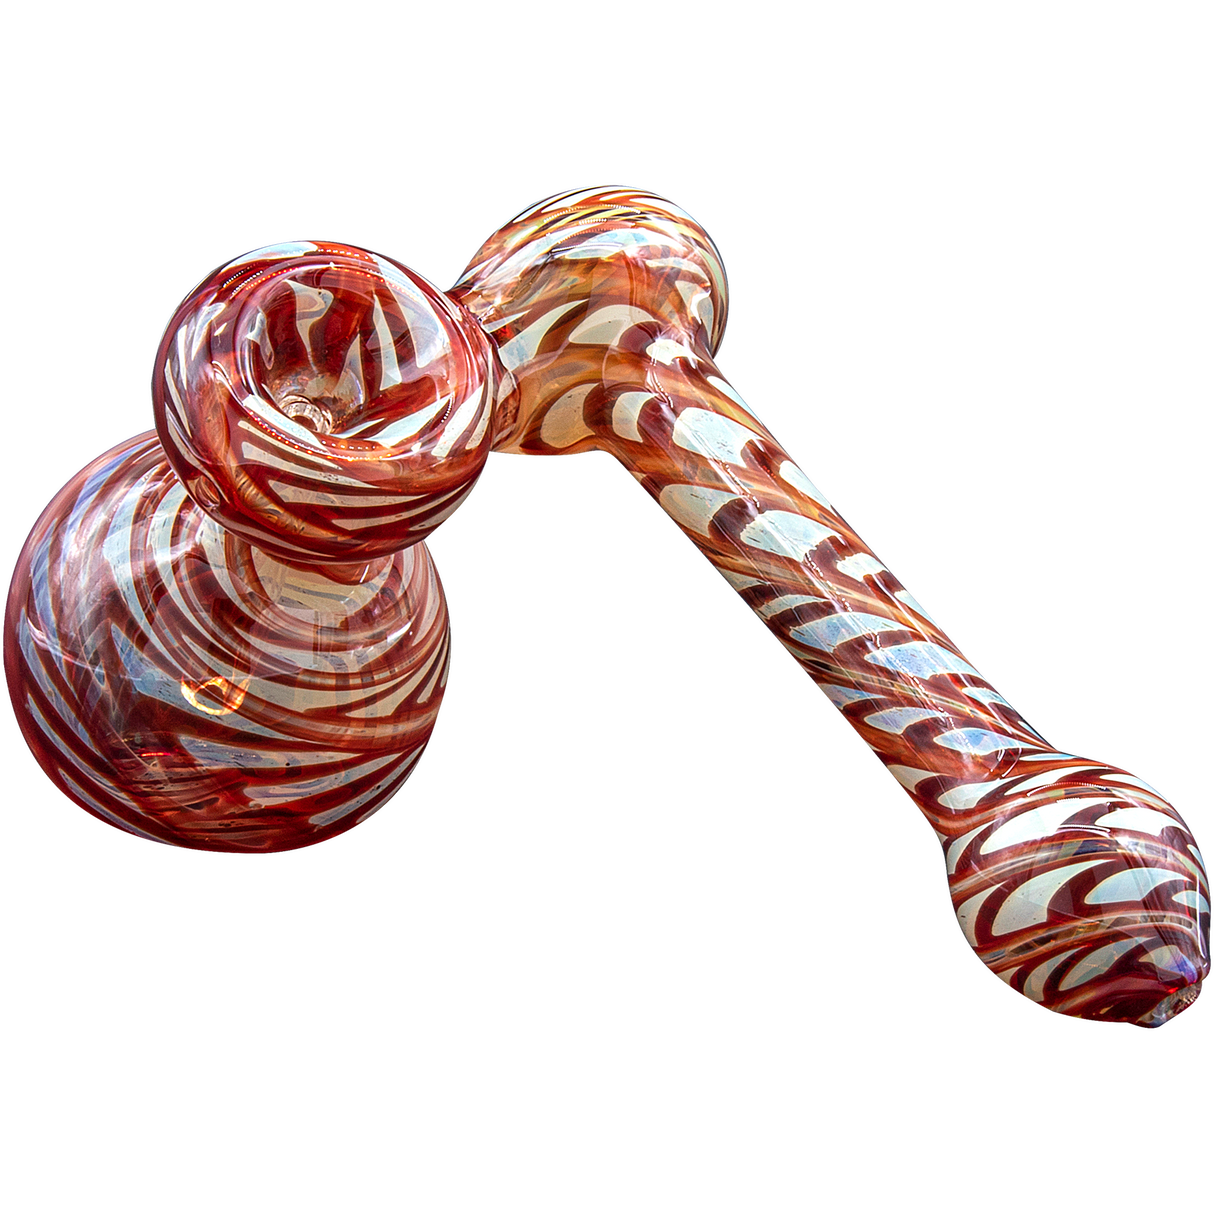 LA Pipes Colored Sidecar Bubbler in Ruby Red with Fumed Glass Design, 6" Length